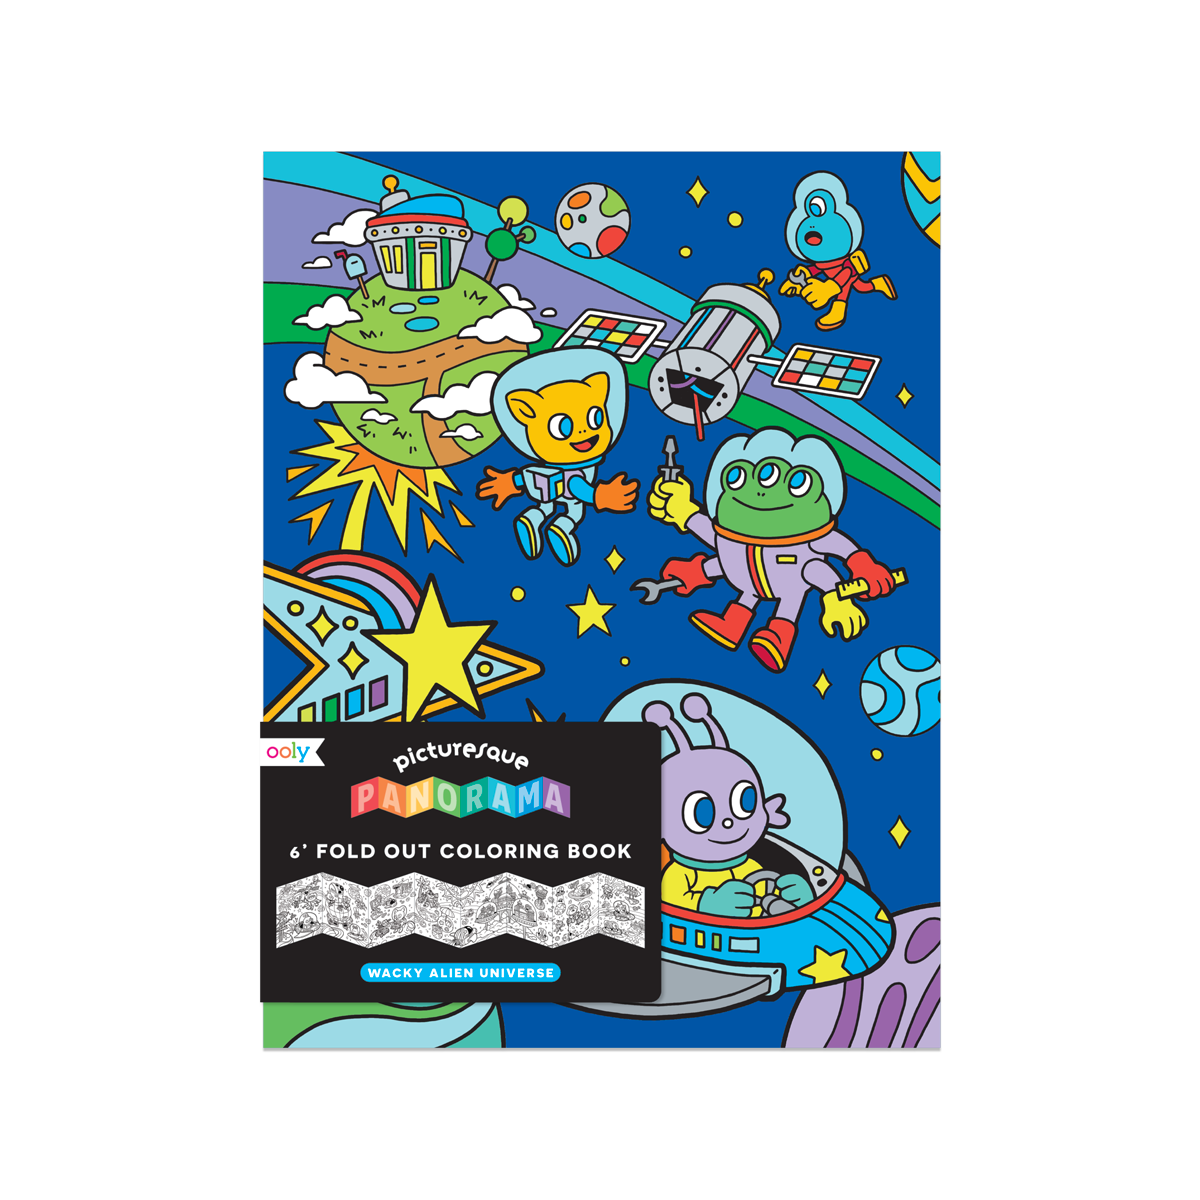 OOLY cover of Picturesque Panorama Wacky Alien Universen coloring book 